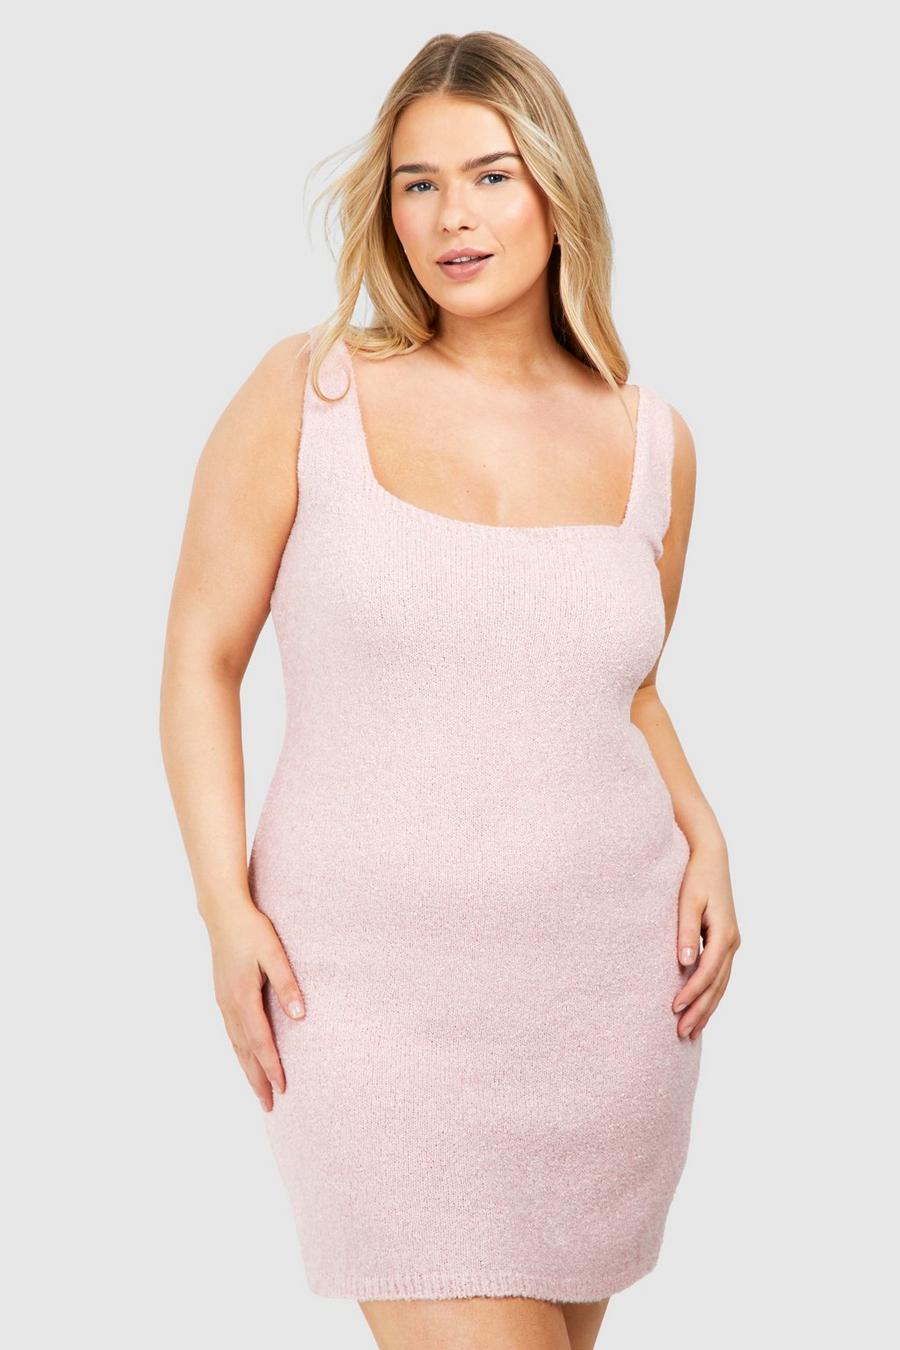 Grande taille - Robe courte à col carré, Baby pink